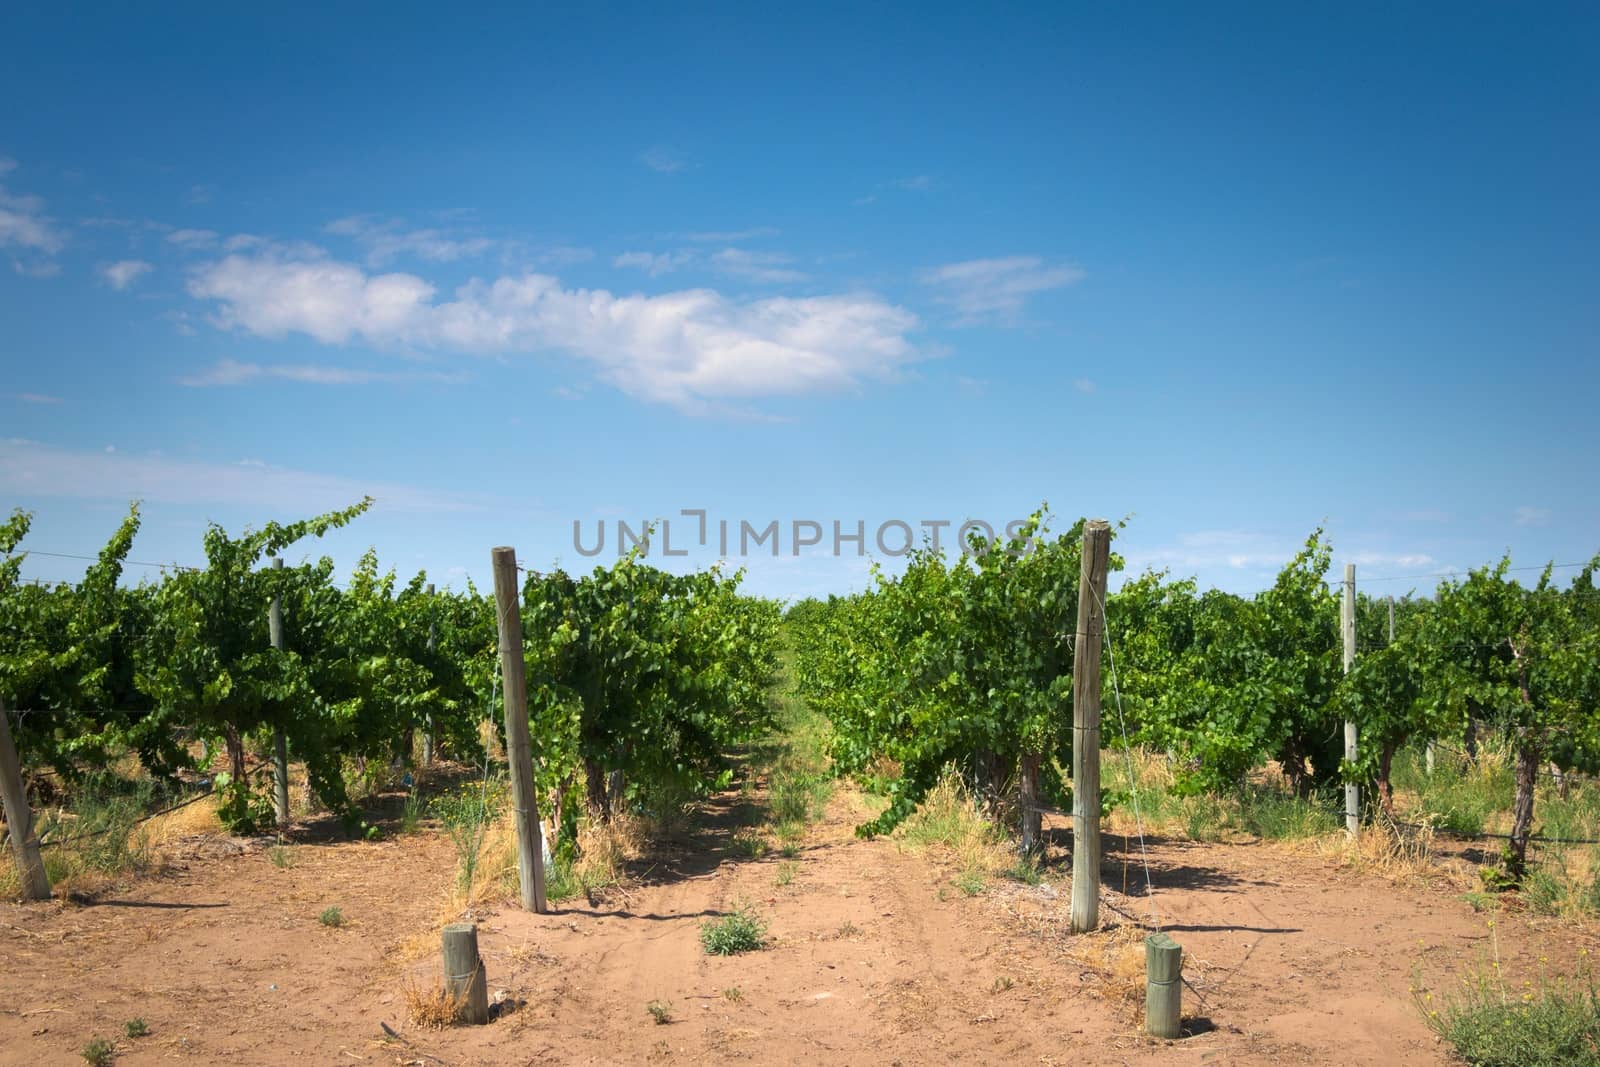 Grapevine rows at a winery estate in Mendoza, Argentina. by hernan_hyper